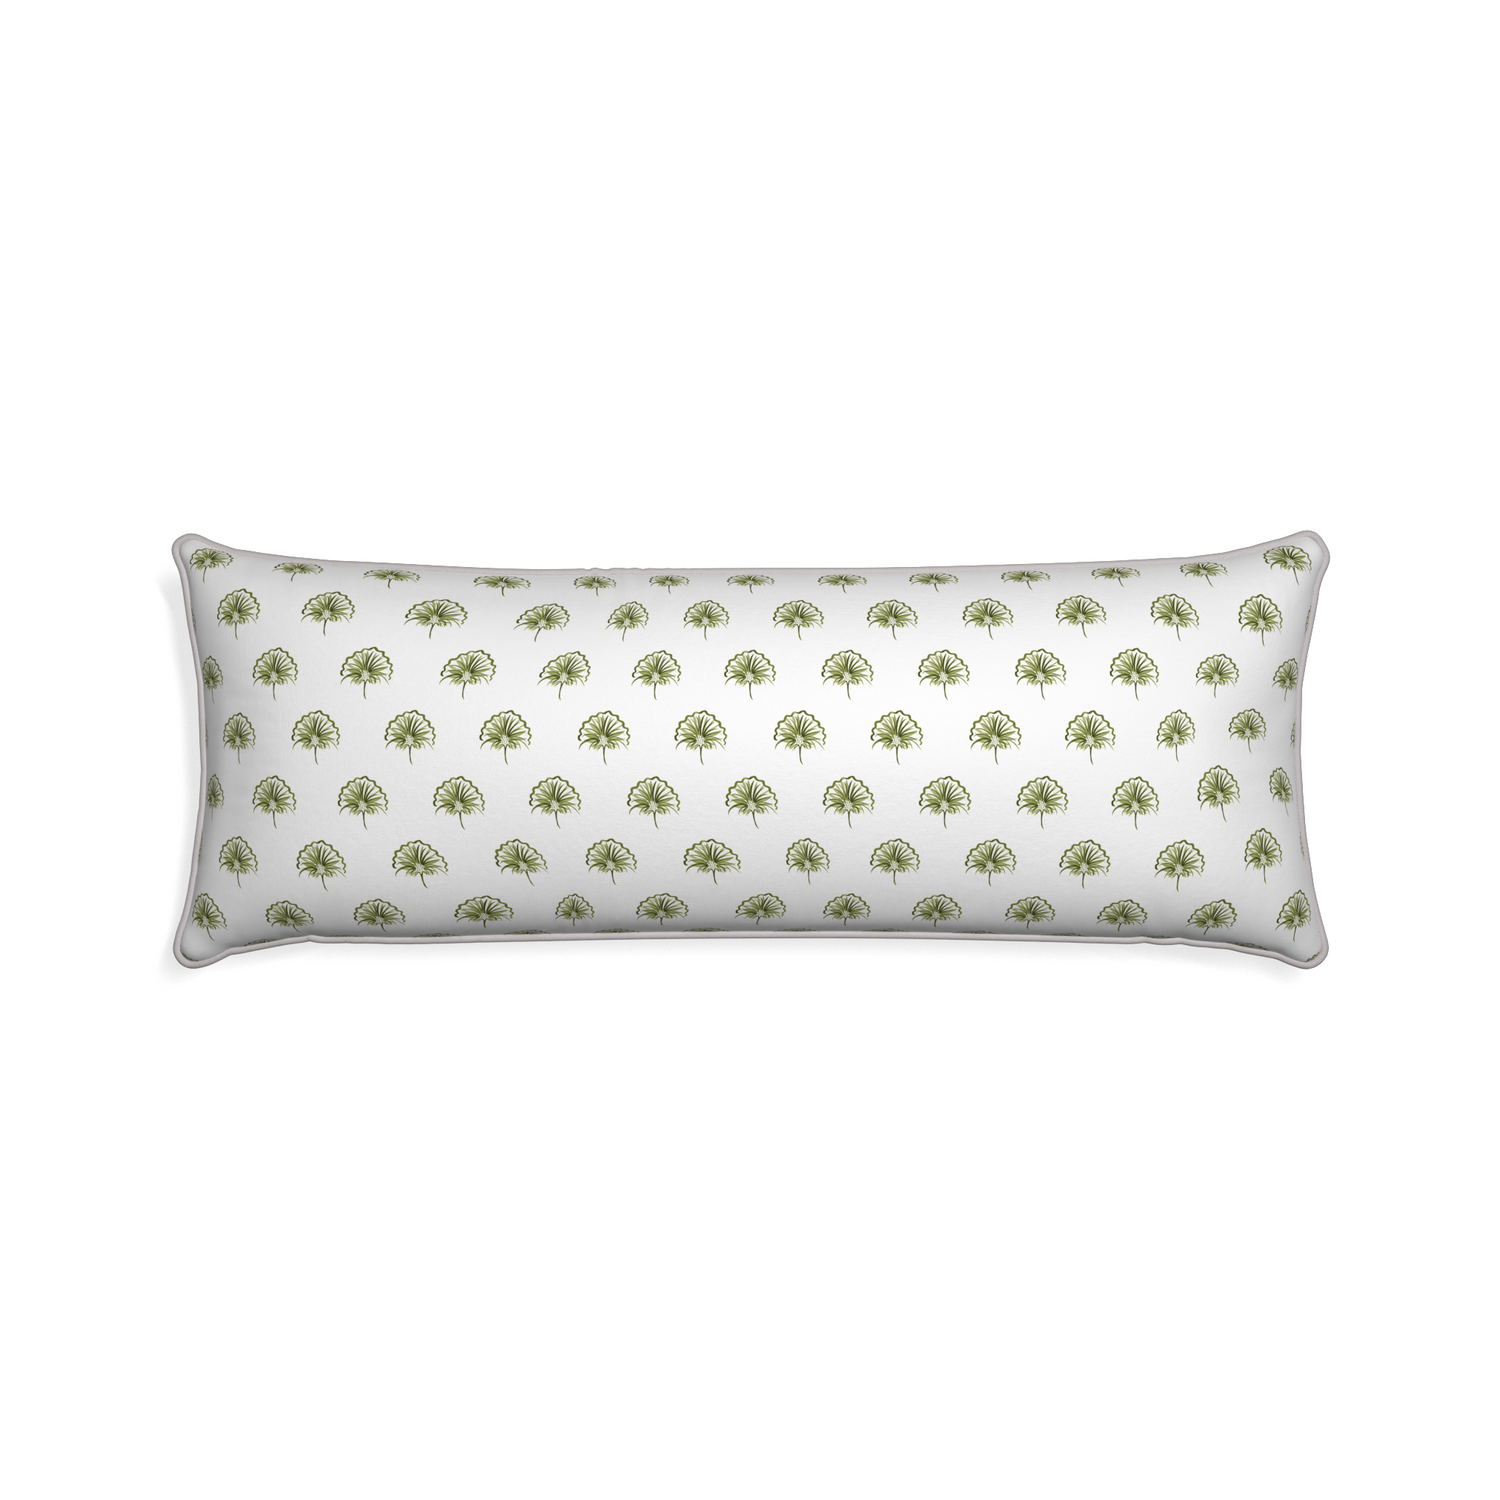 Xl-lumbar penelope moss custom pillow with pebble piping on white background